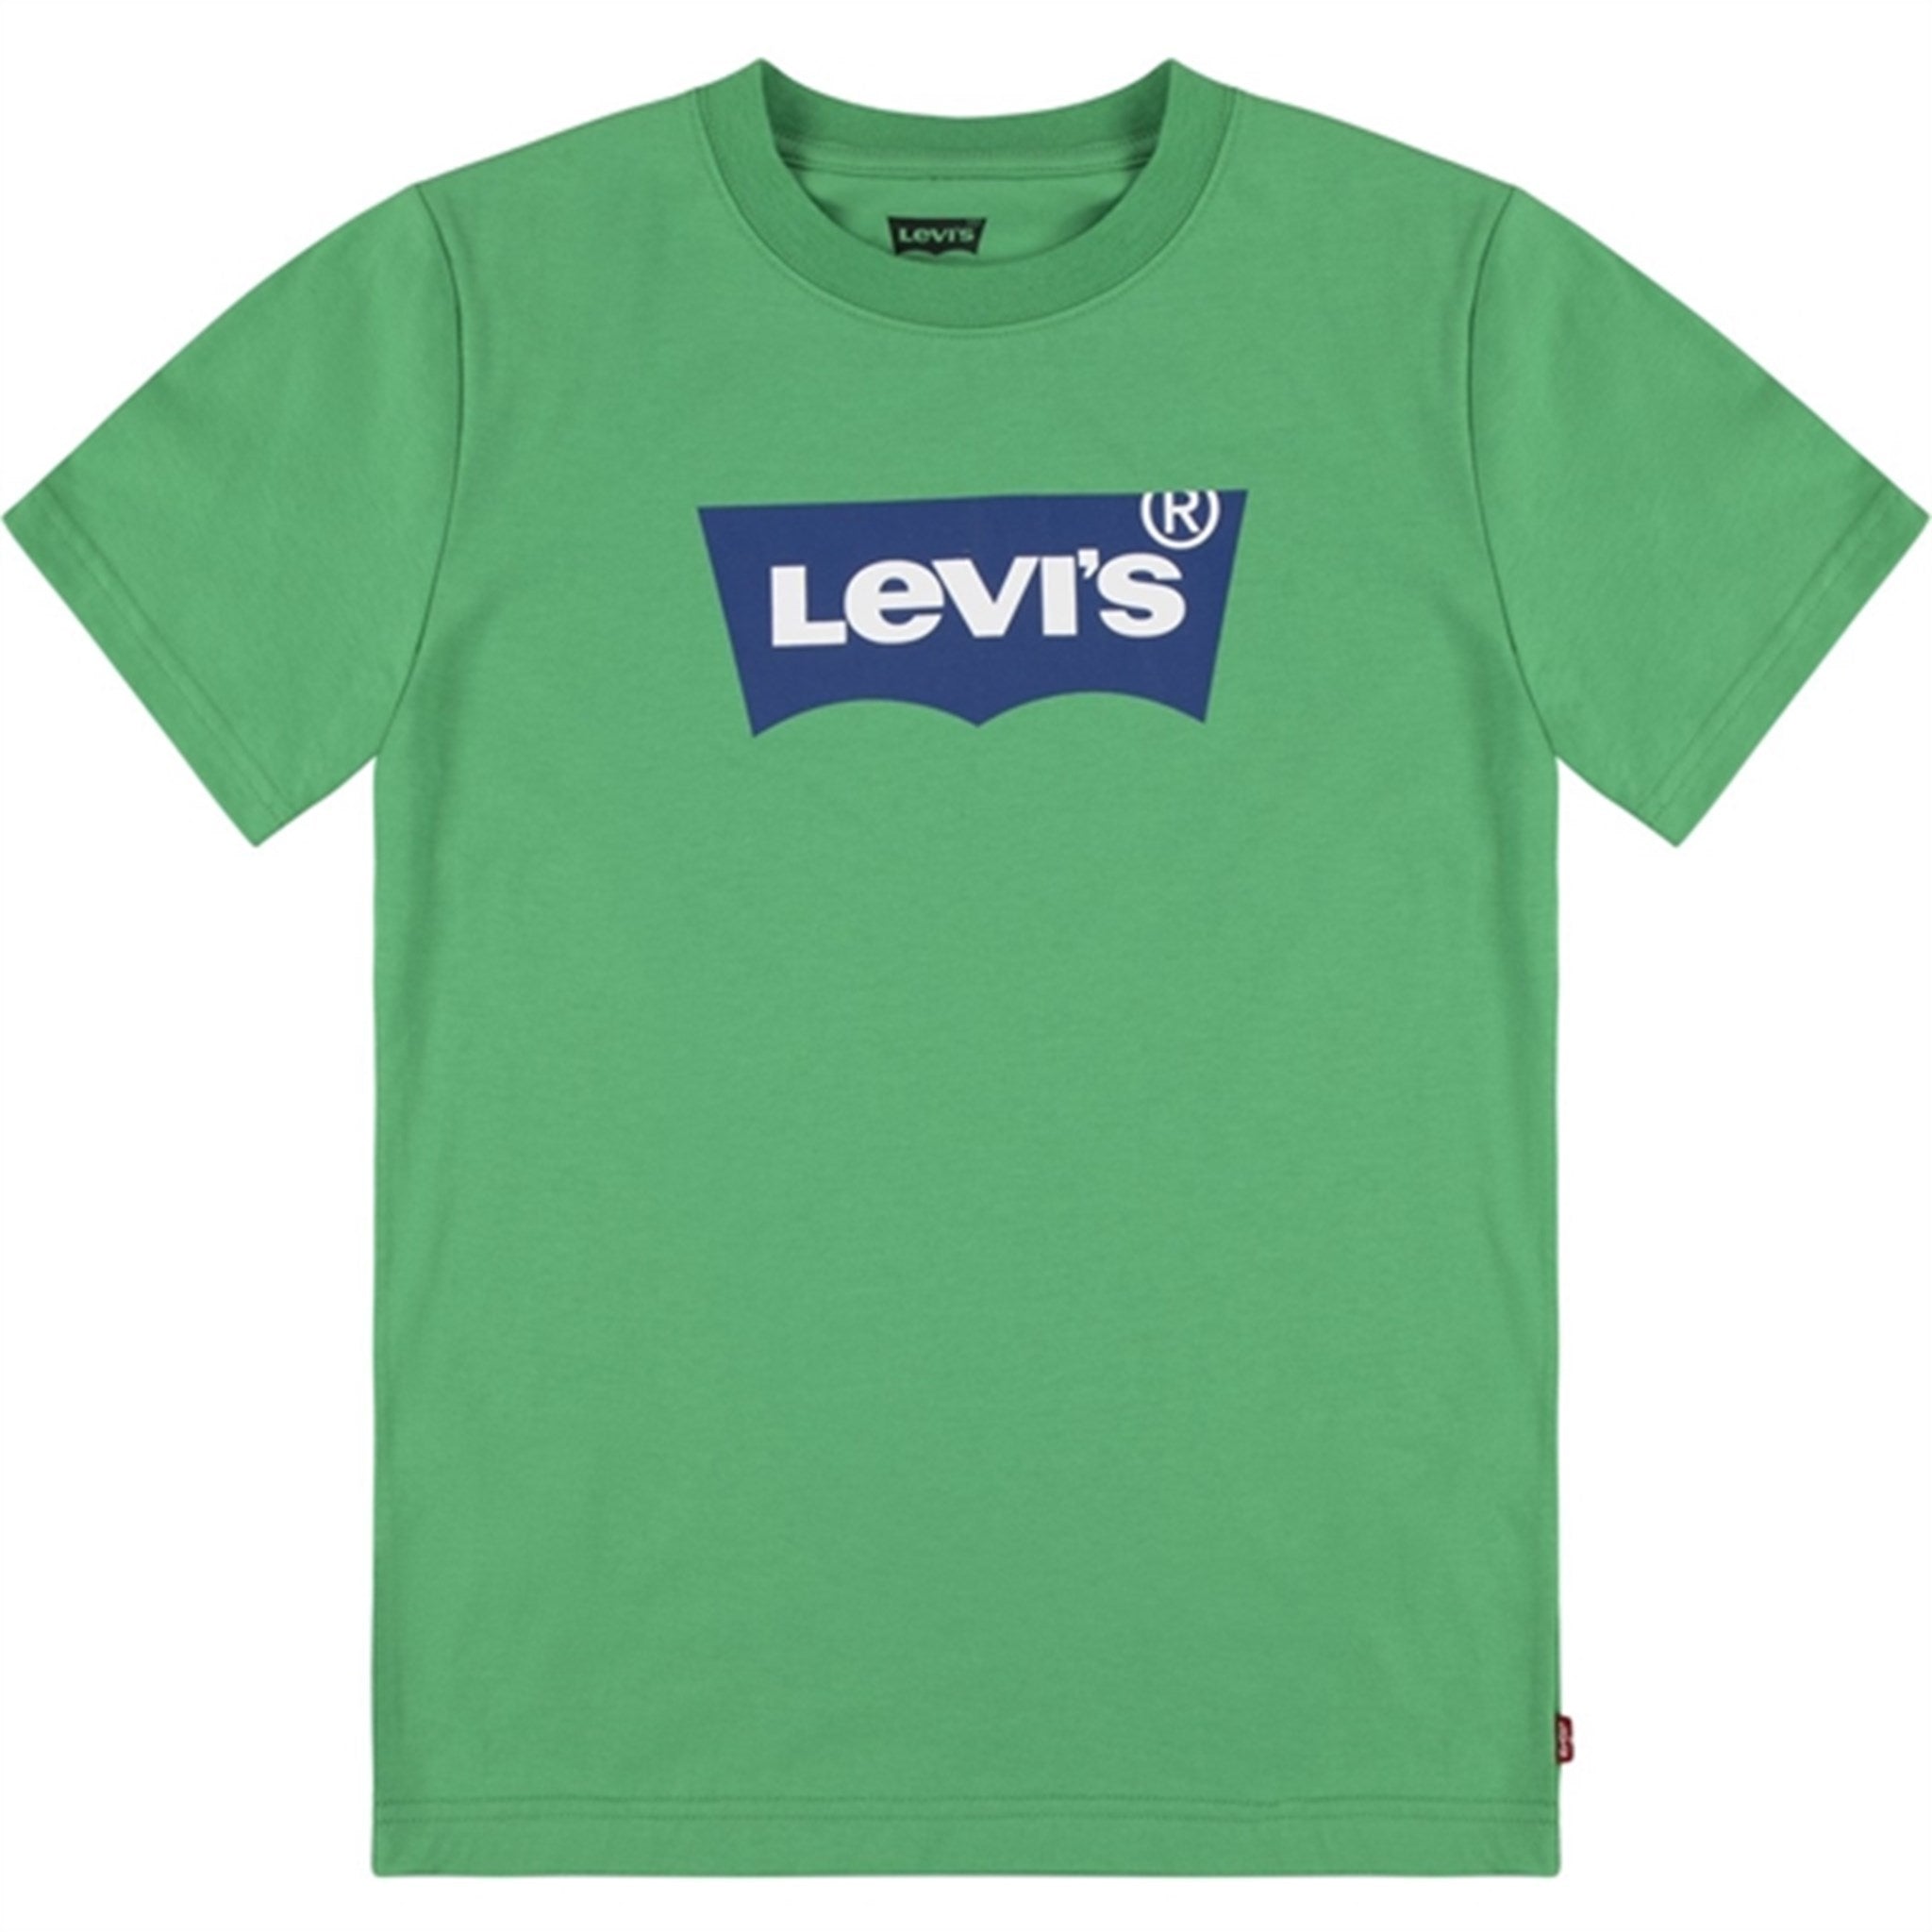 Levi's Graphic Batwing T-Shirt Bright Green